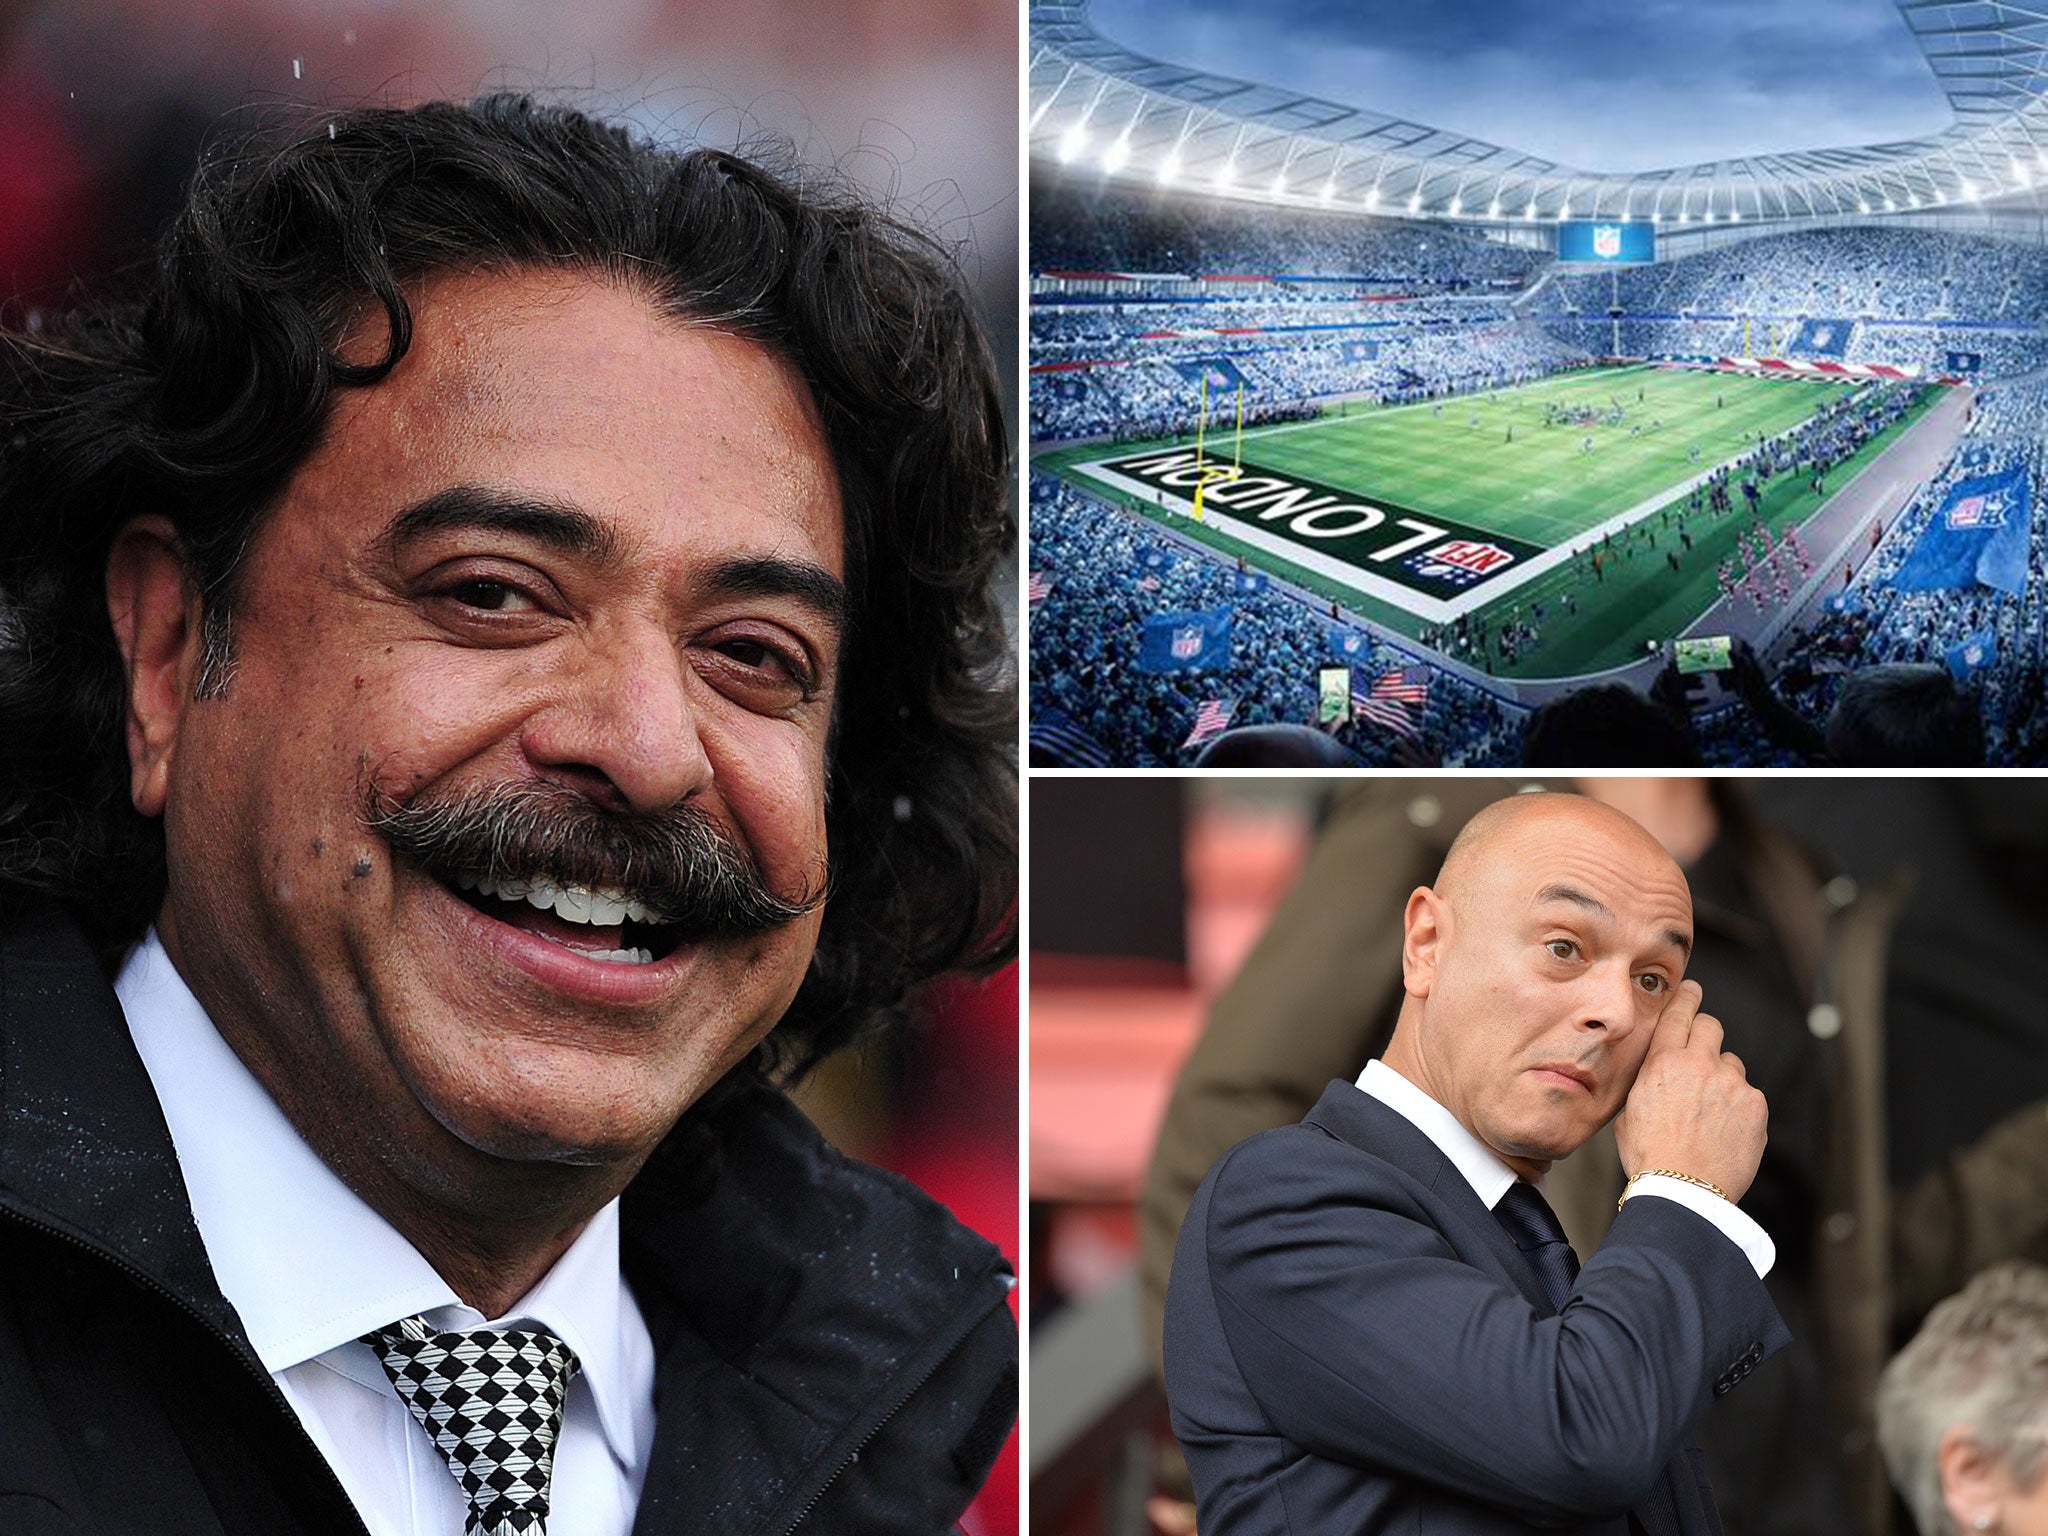 Fulham owner Shahid Khan wants to sell the club in order to bu Tottenham